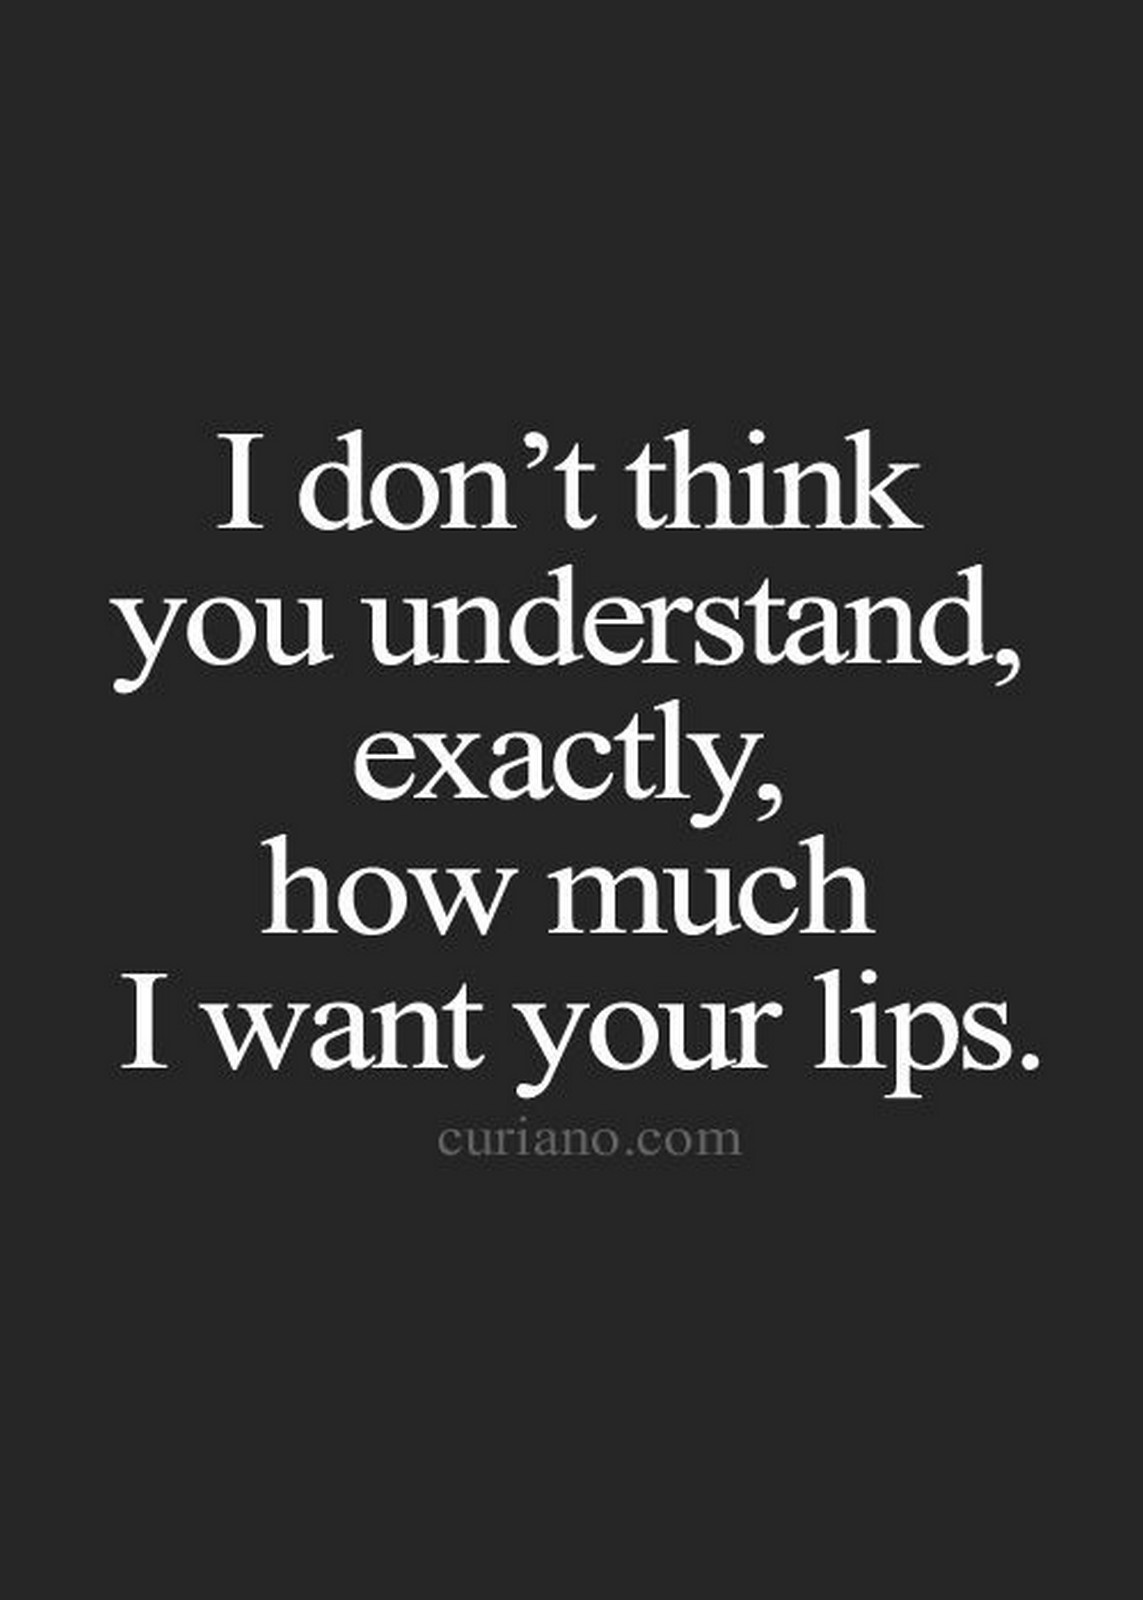 55 Romantic Quotes - "I don't think you understand, exactly, how much I want your lips."